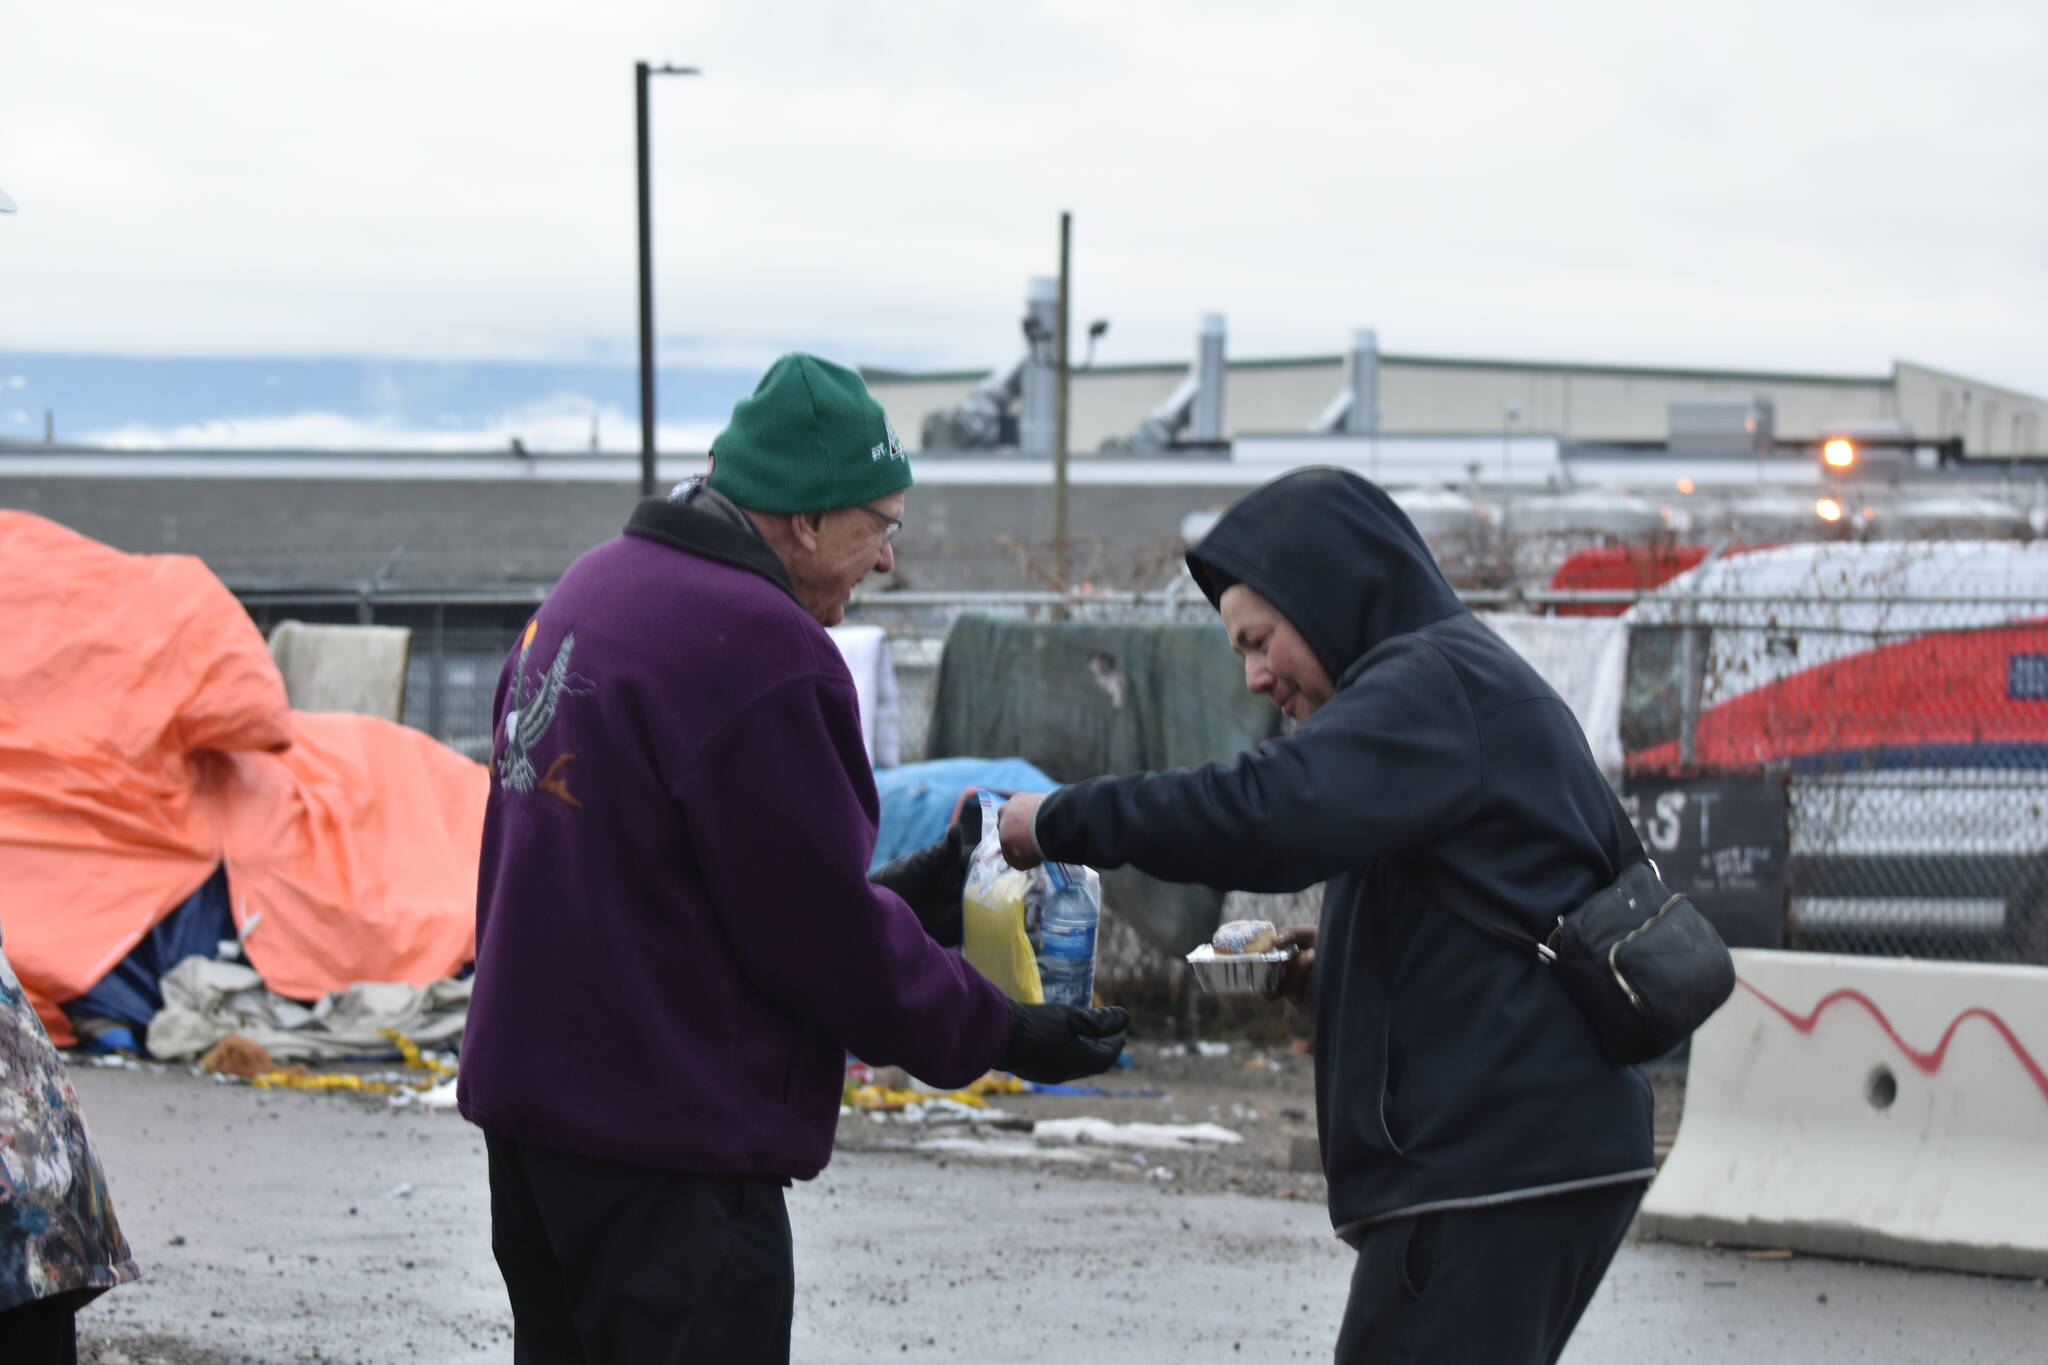 Mission Villas retirement home and John’s Angels handed out food, clothes, and care packages to those experiencing homelessness at Kelowna’s Tent City on Saturday, Jan. 27. (Jordy Cunningham/Capital News)